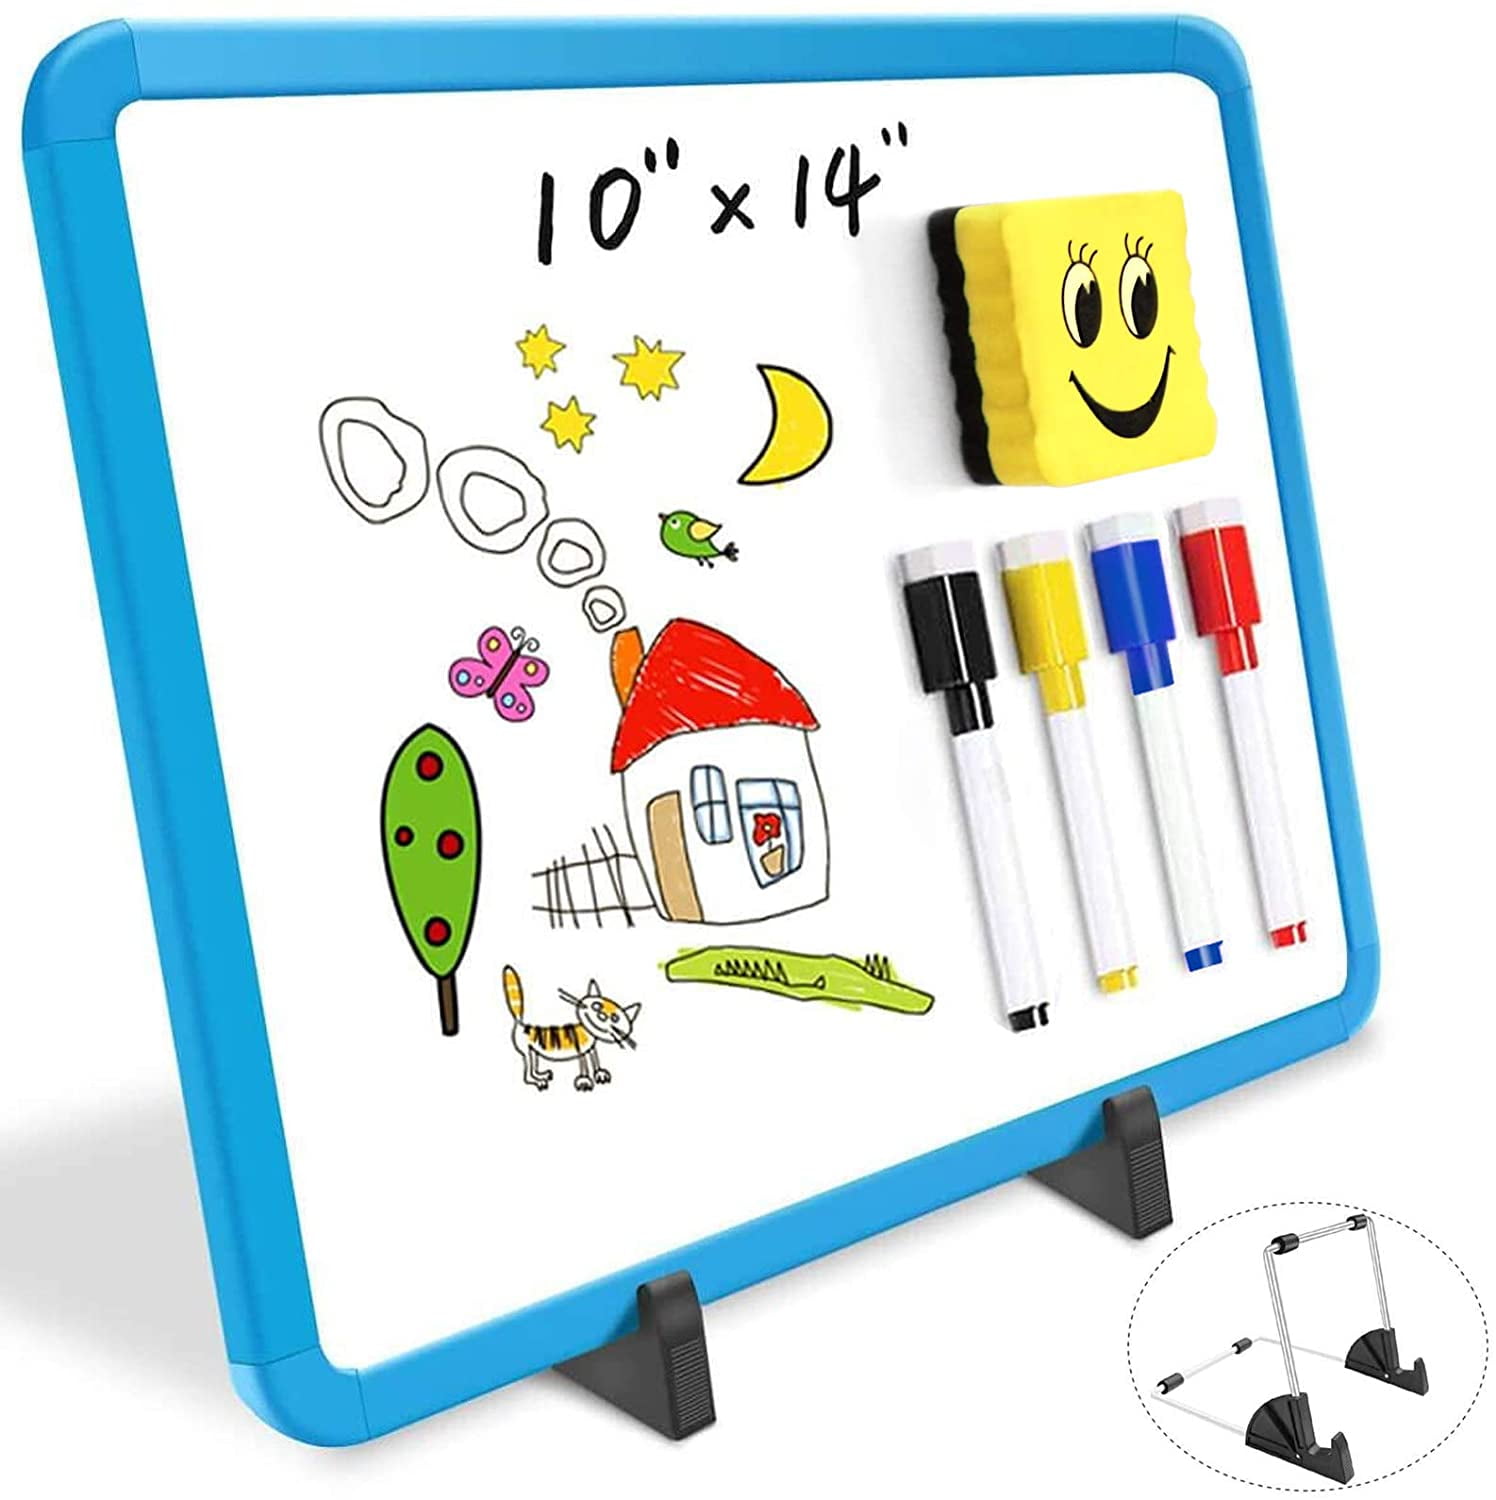 Small White Board Writing Board Desktop Dry Erase Board Personal Whiteboard with Stand Wooden Frame for Students 11 x 11 Double-Sided Magnetic Dry Erase Board and 8 Dry Erase Markers with Eraser 